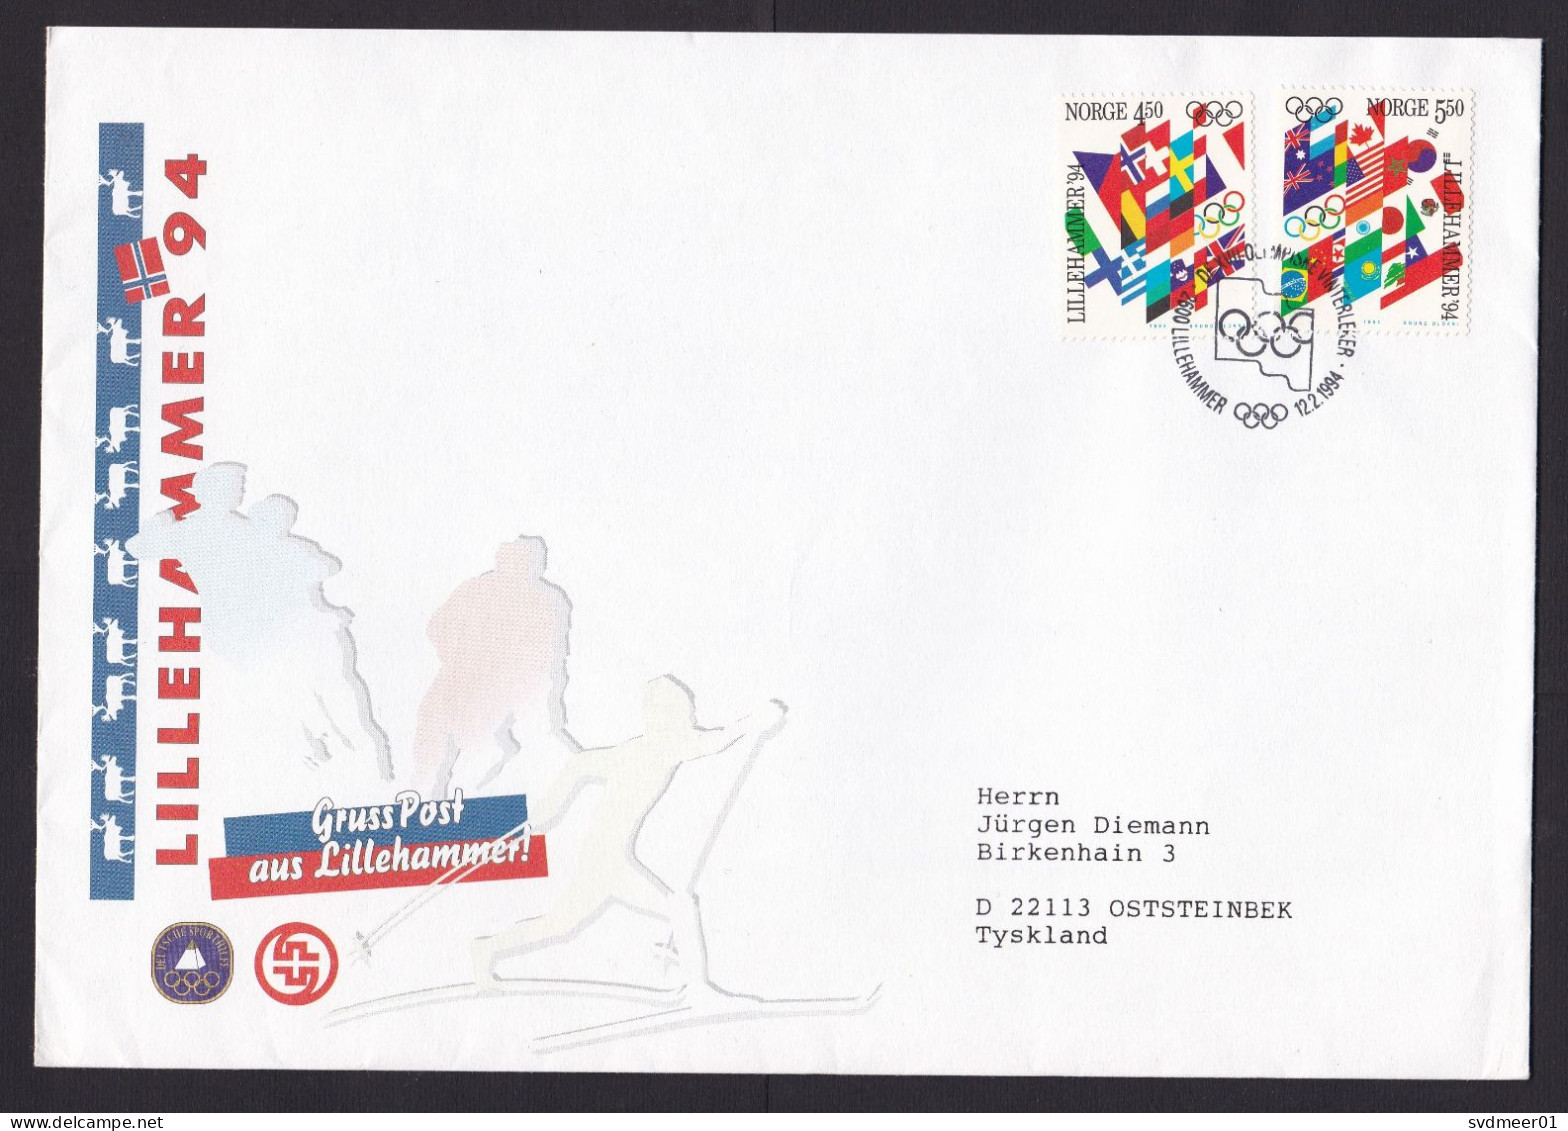 Norway: Cover To Gerrmany, 1994, 2 Stamps, Olympics Lillehammer, Picture Cards German Sporters Enclosed (traces Of Use) - Storia Postale